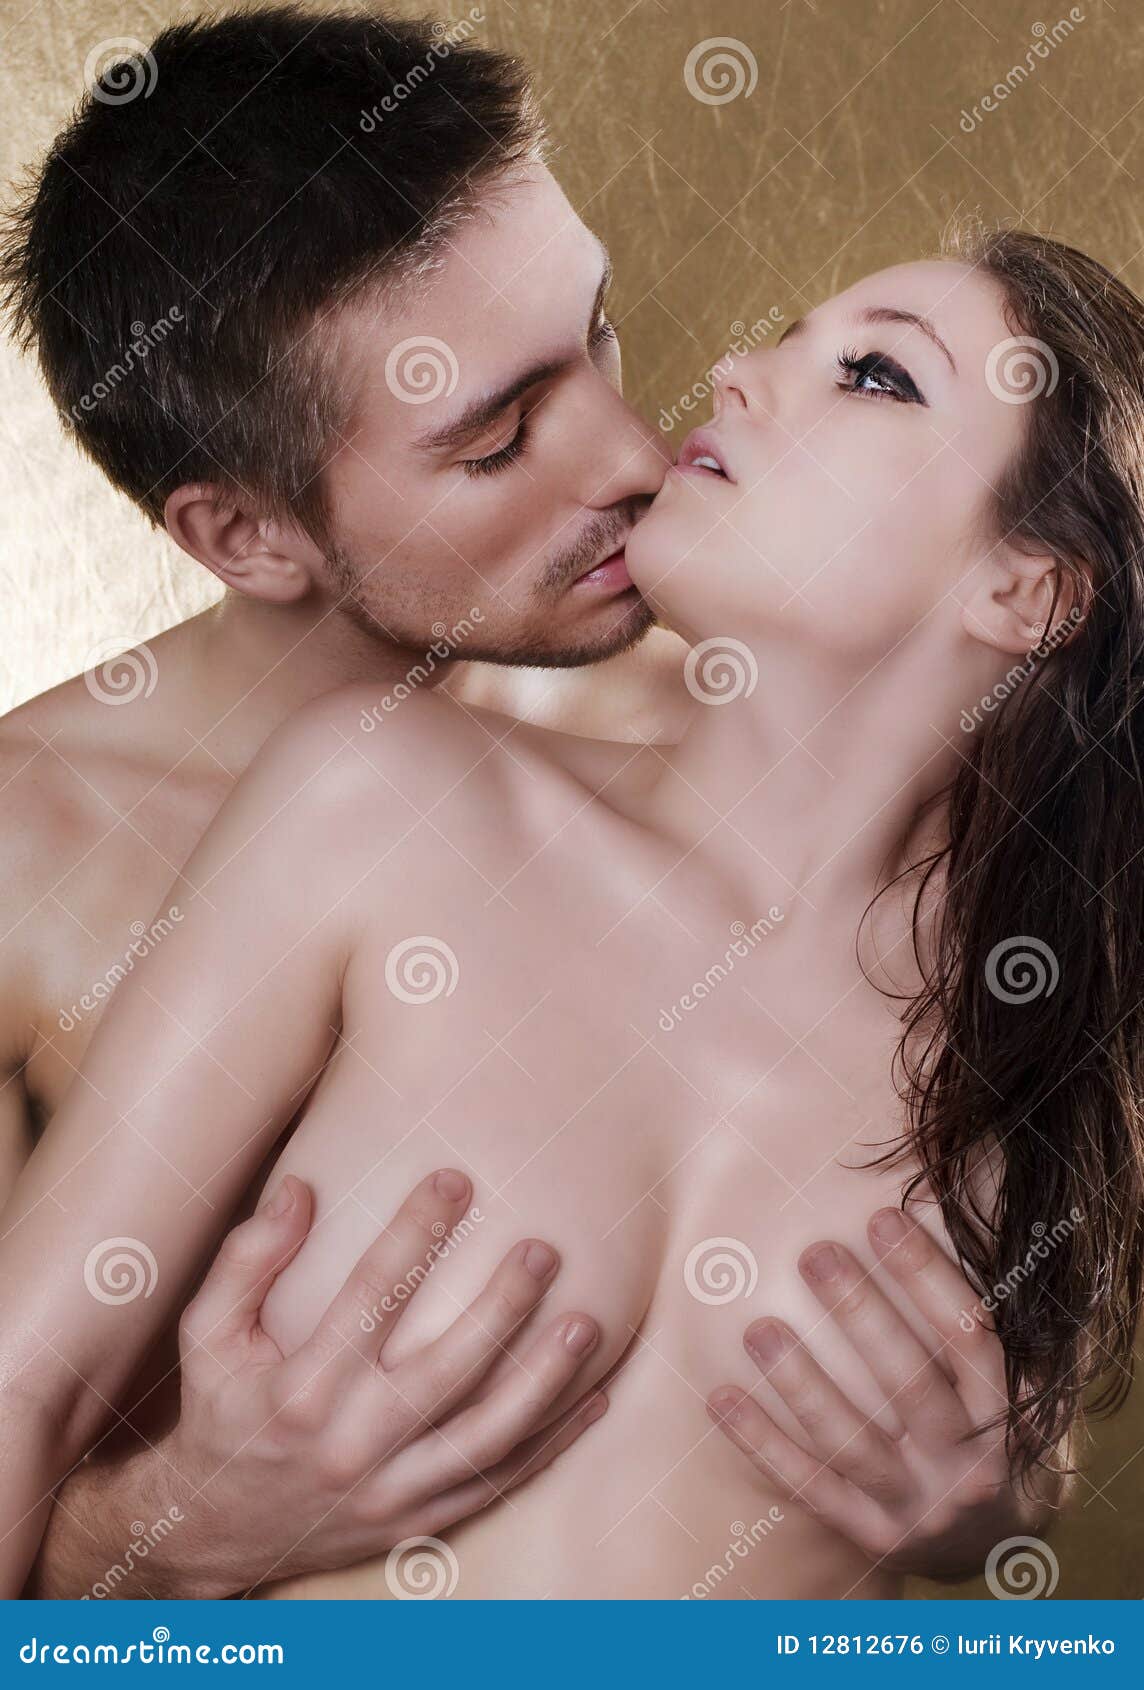 Kissing images naked